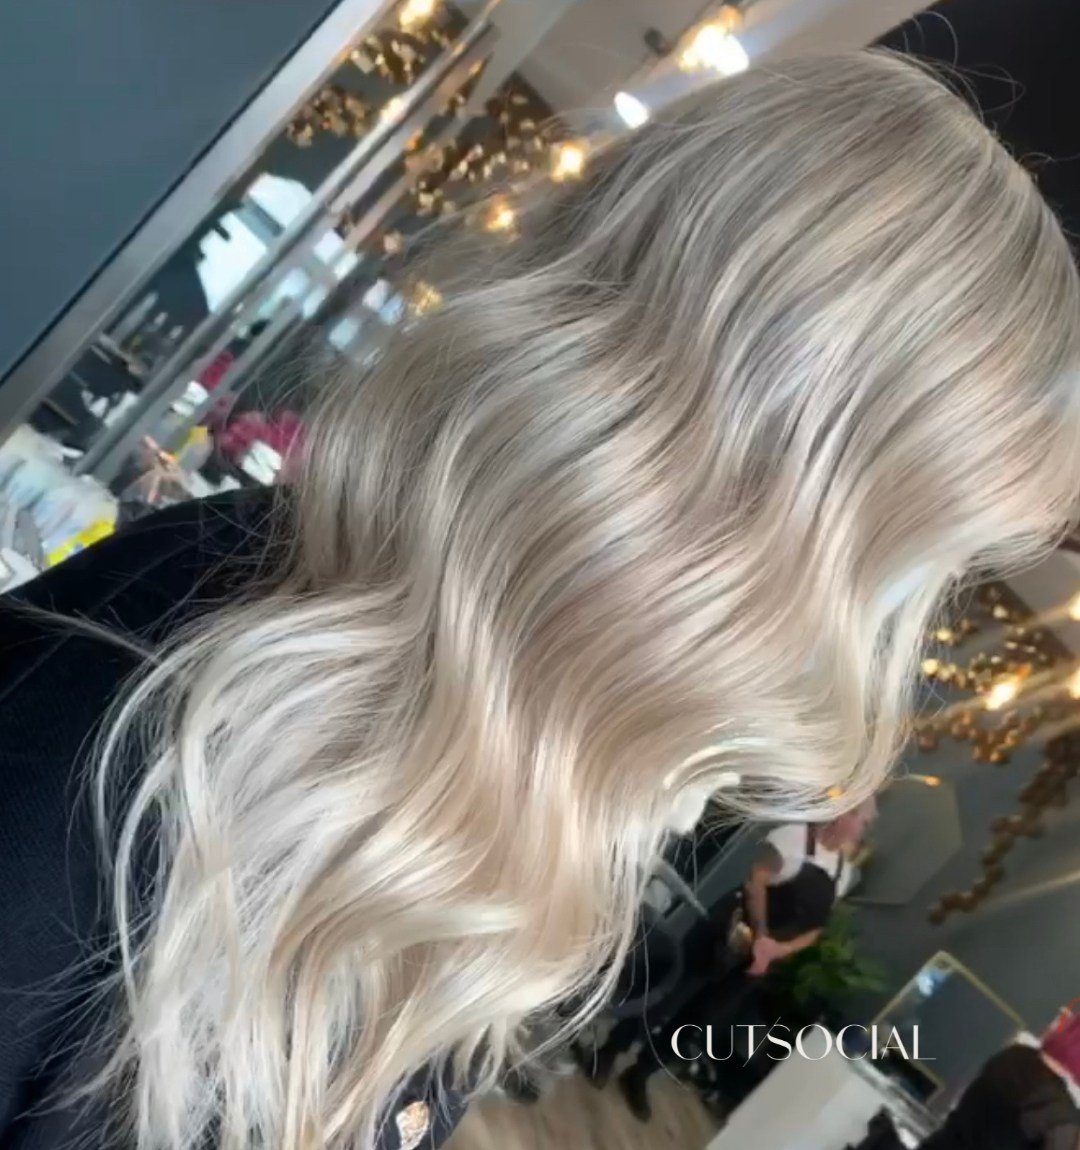 Blonde that shines ✨

Gorgeous creamy blonde for our fabulous client, proving you CAN achieve a healthy blonde! If you want to get the perfectly healthy blonde, book a consultation with your chosen stylist through the link in our bio 🥰

#cutsocial #